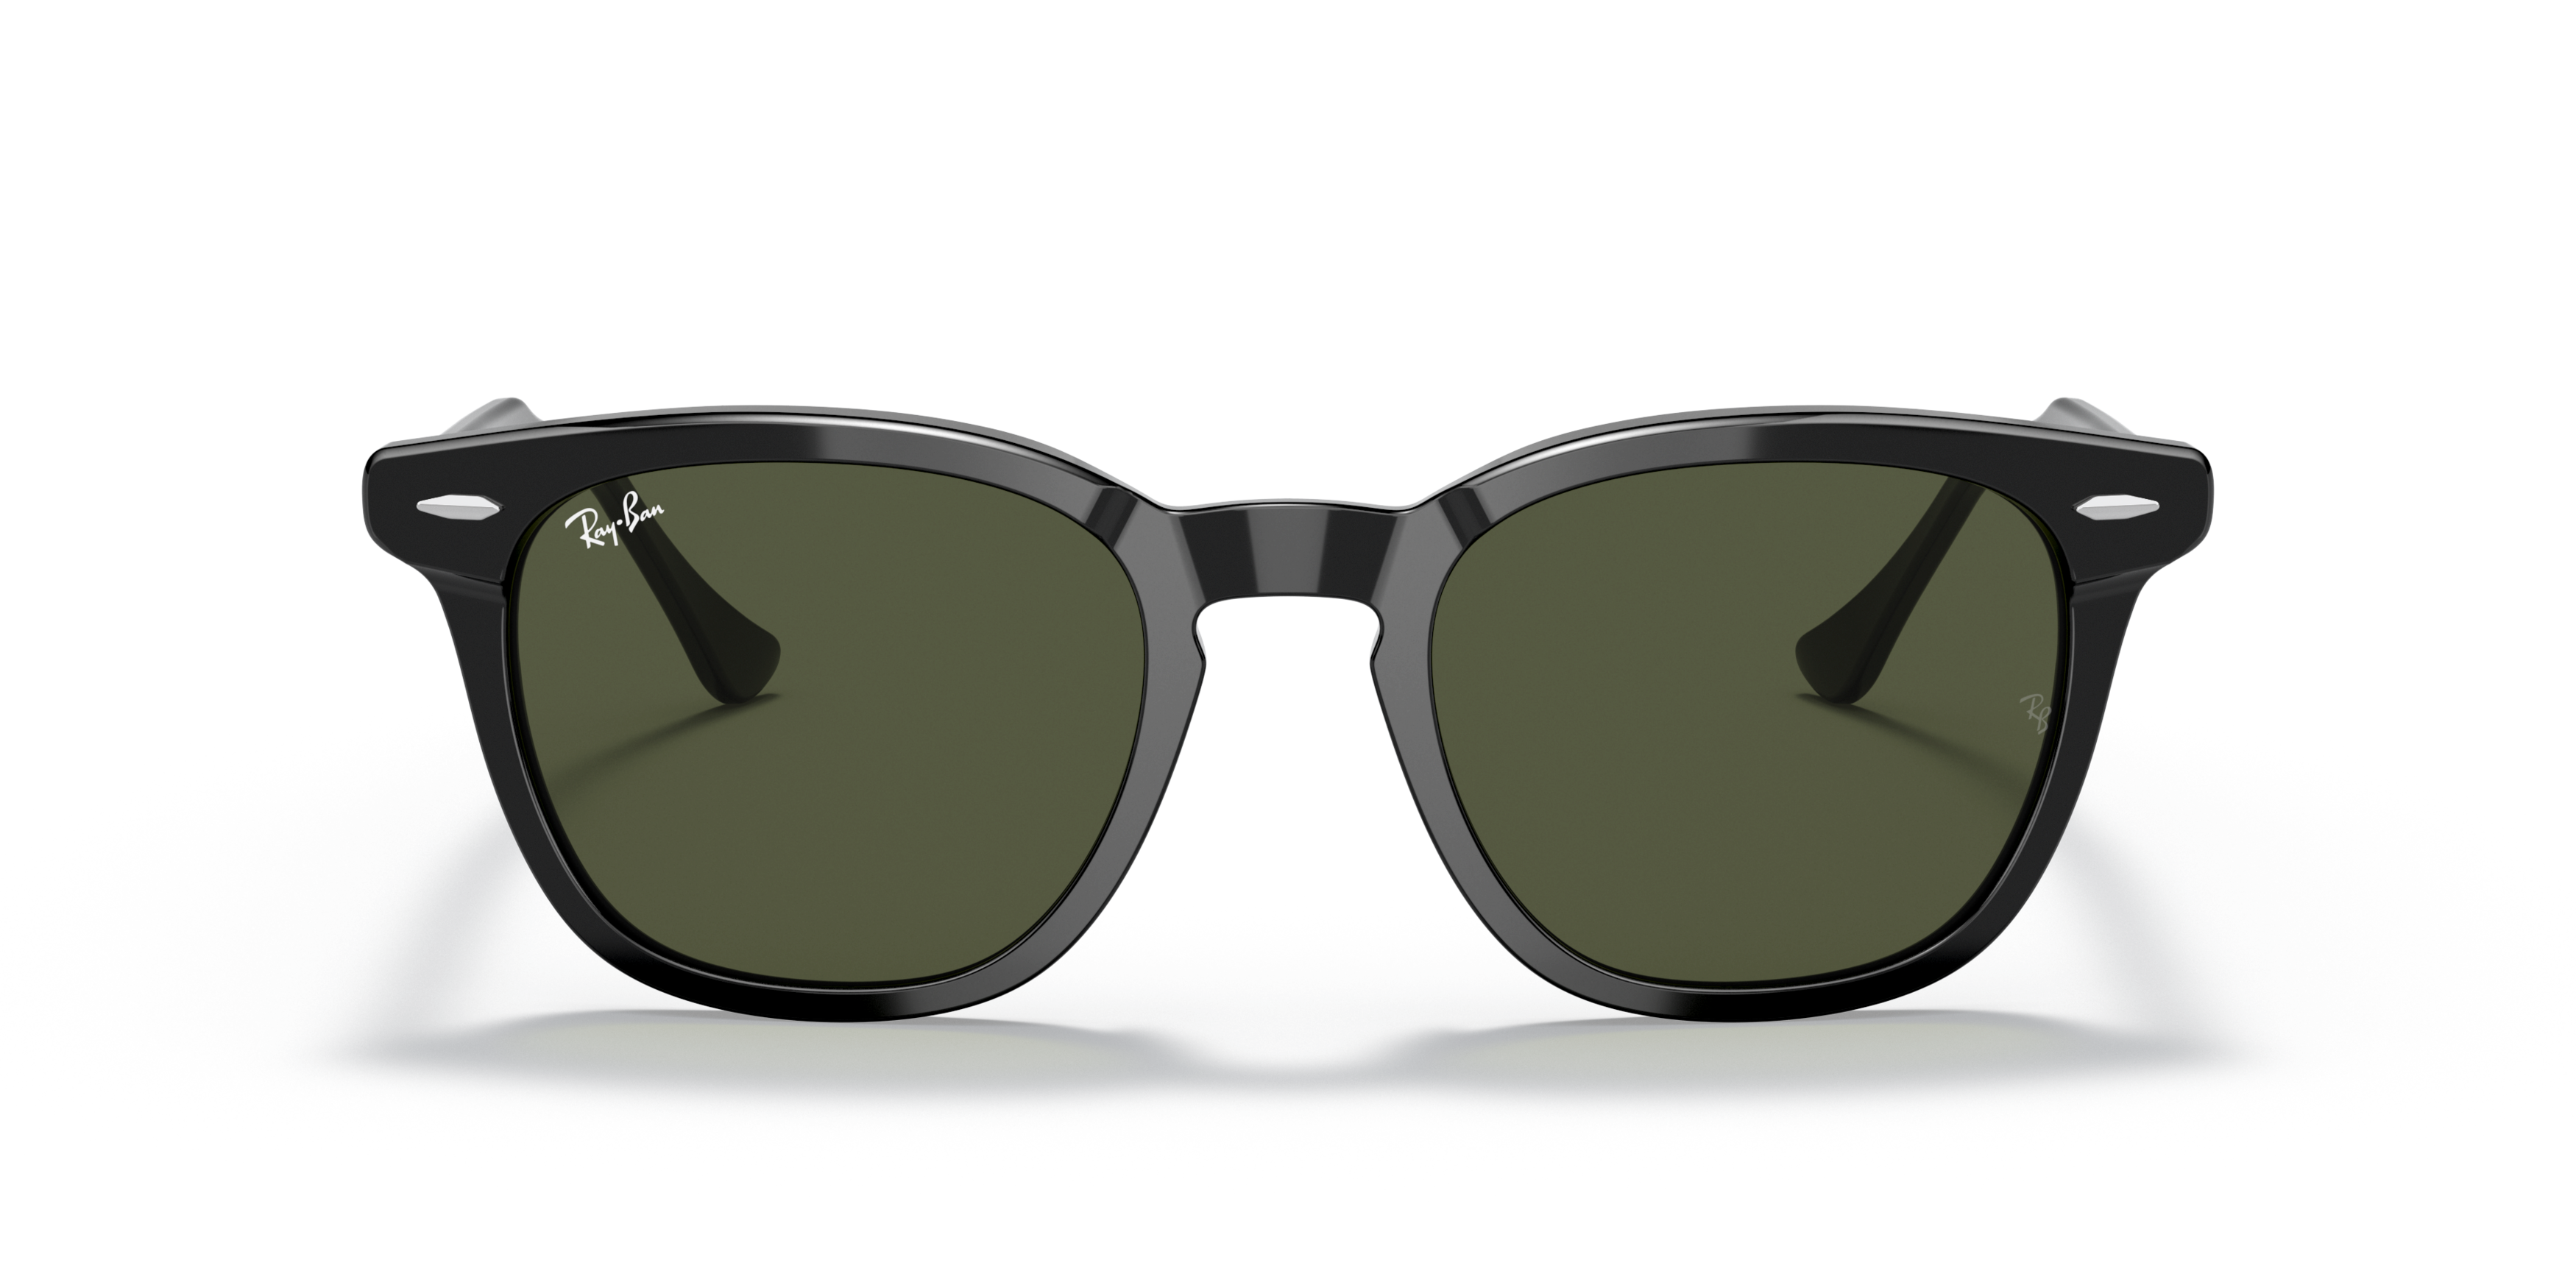 [products.image.front] RAY-BAN RB2298 901/31